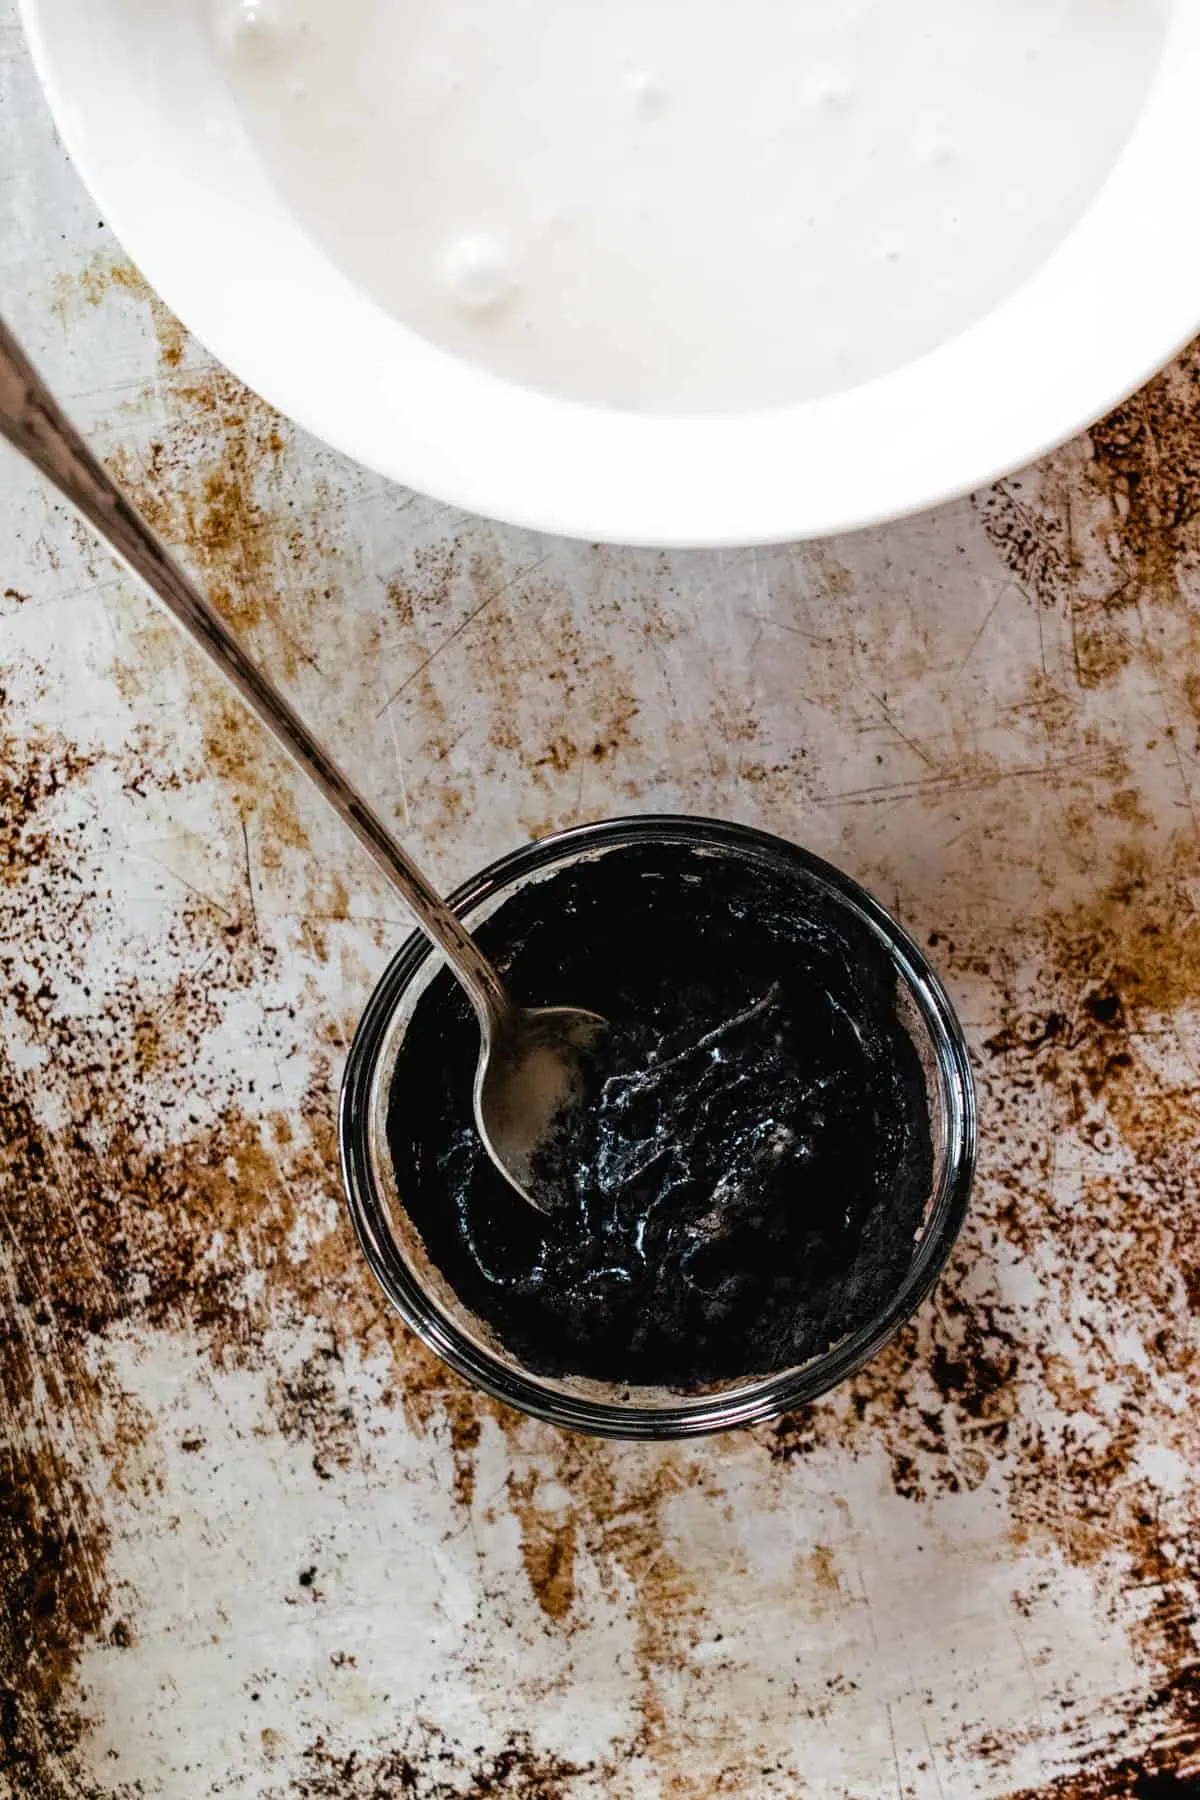 Black icing like confection in a small glass bowl next to a larger white bowl with white icing. 